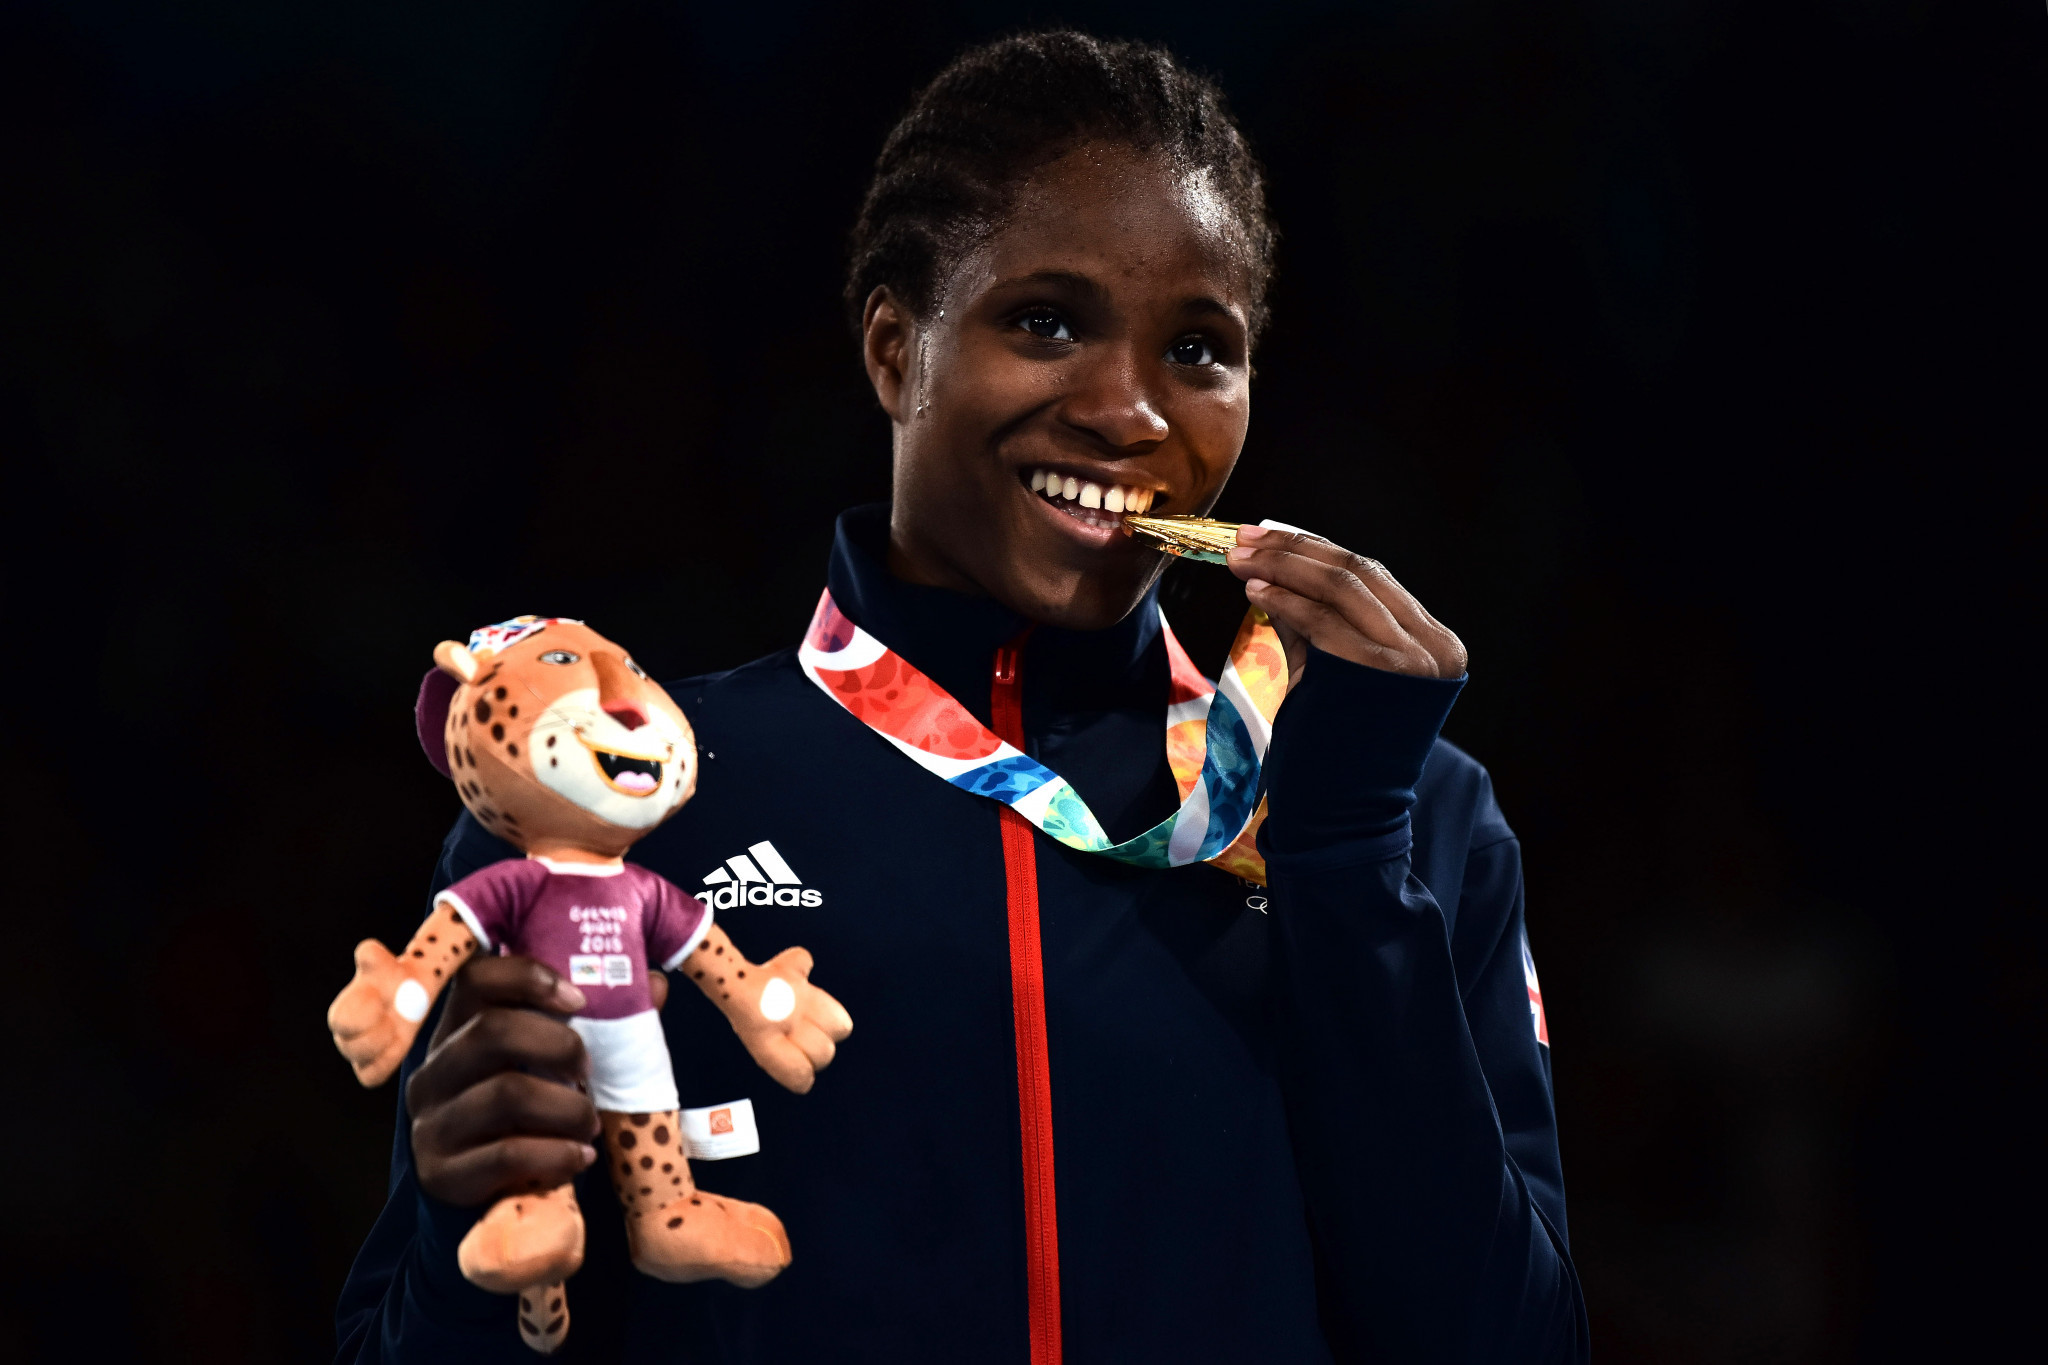 Caroline Dubois is currently undefeated and will make her British senior debut at the European qualifiers in London next month ©Getty Images